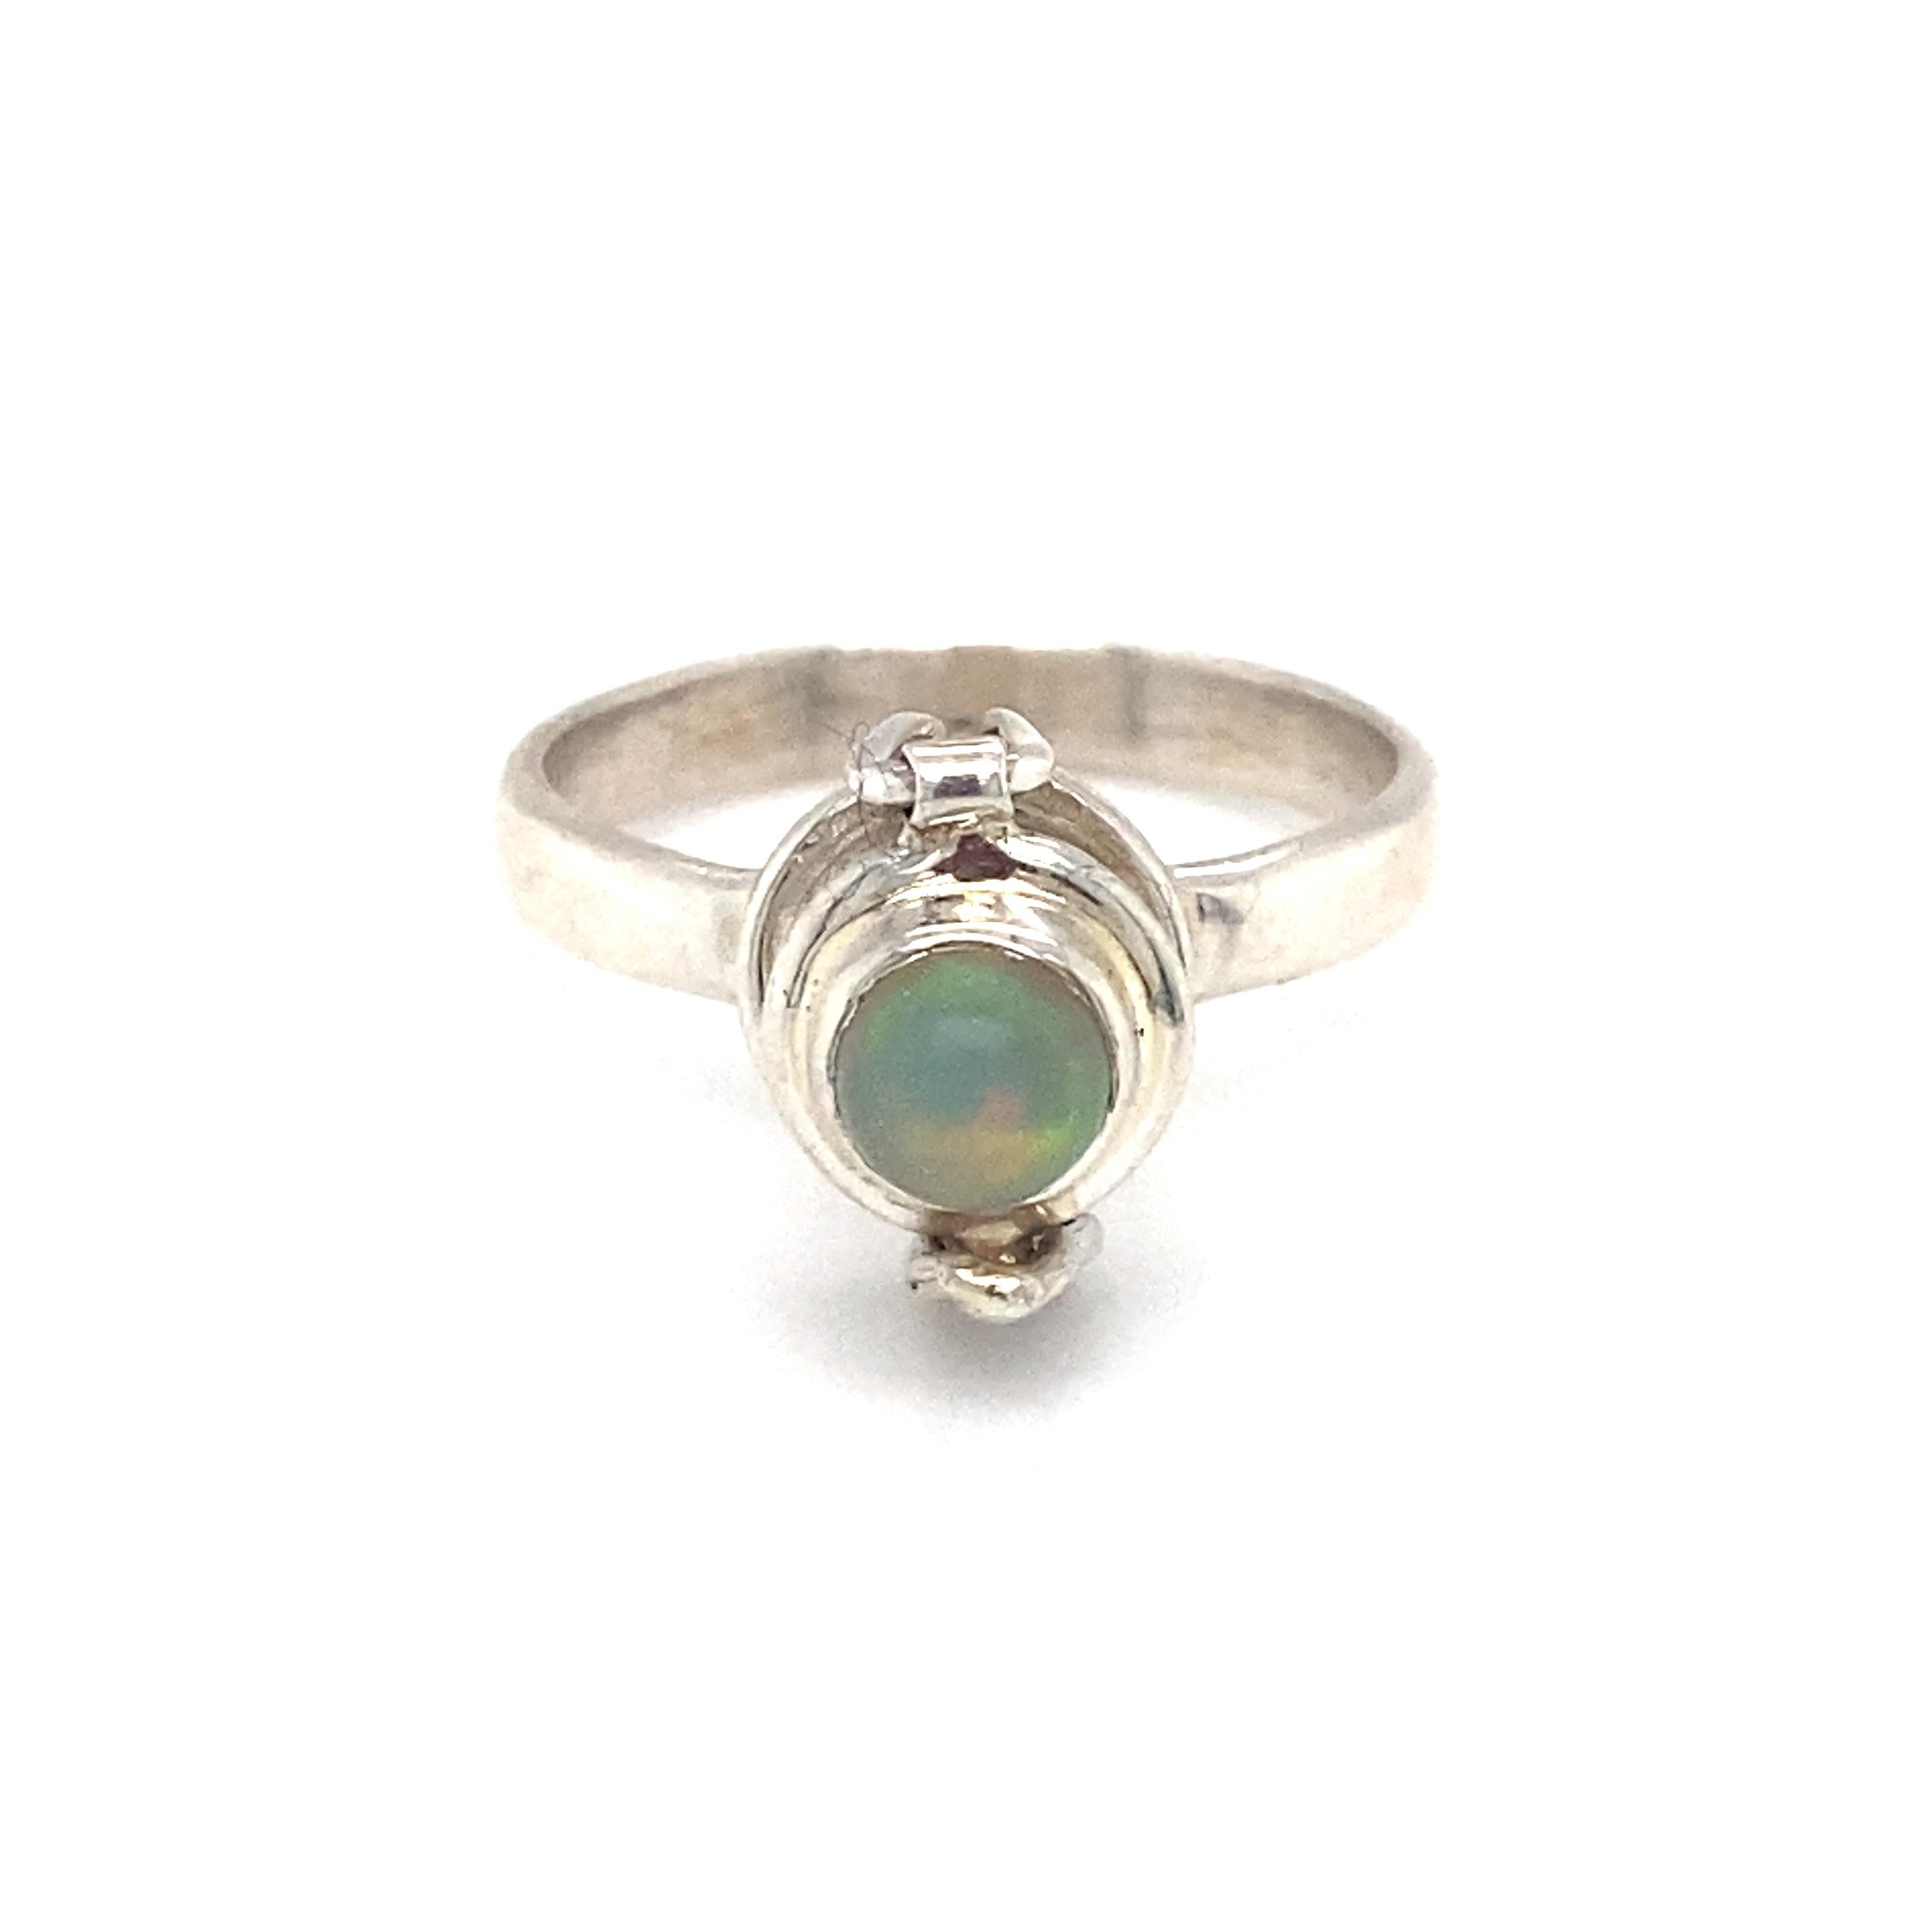 
Item Details: This poison ring has a round Ethiopian jelly opal set in sterling silver.

Circa: 21st Century
Metal Type: Sterling Silver
Weight: 2.9g
Size: US 6.5, resizable
